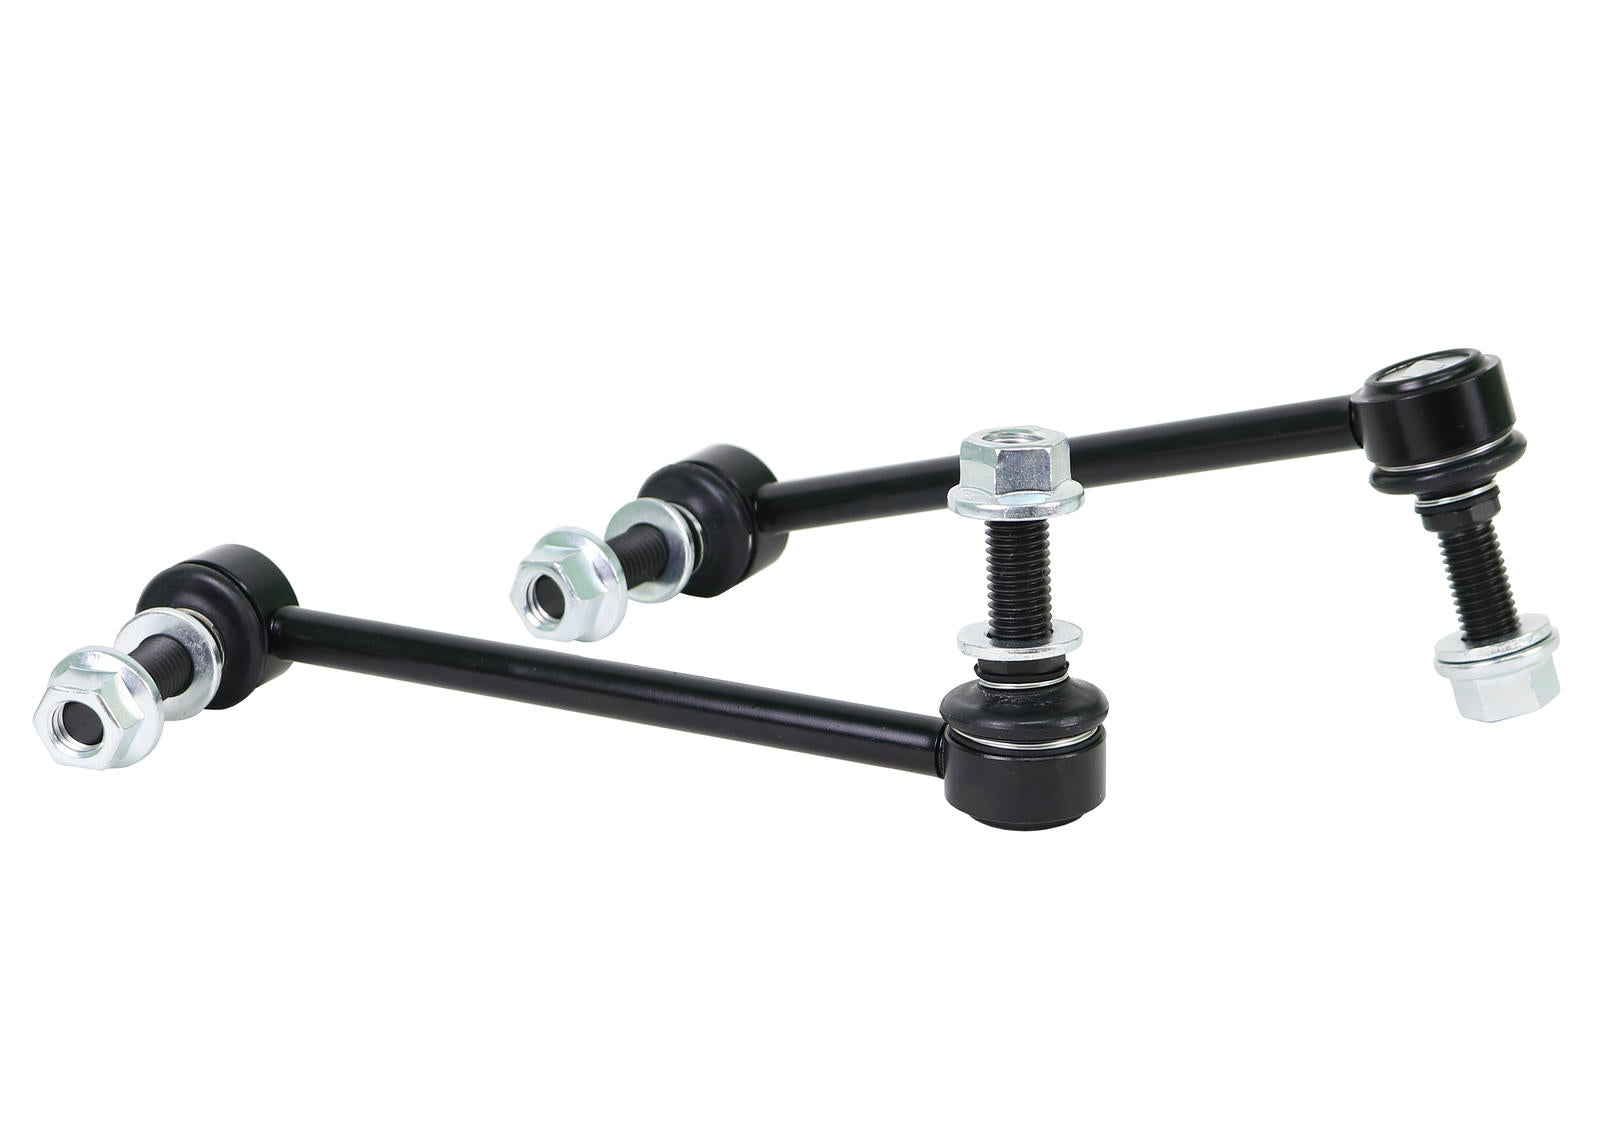 Front Sway Bar Link To Suit Chrysler 300C And Dodge Challenger, Charger